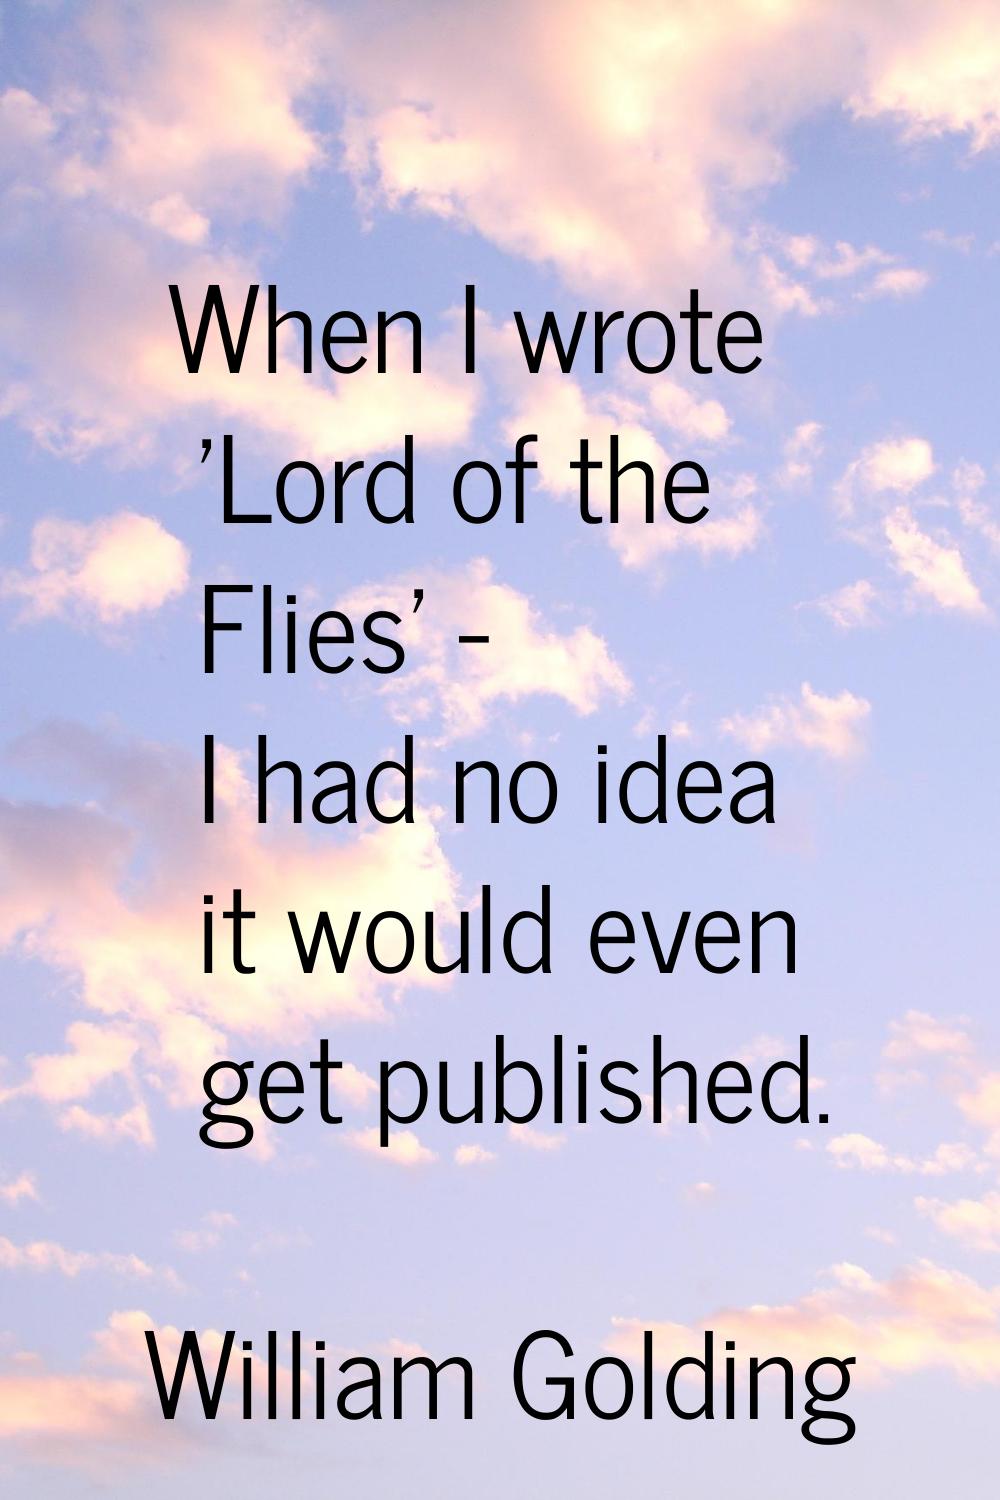 When I wrote 'Lord of the Flies' - I had no idea it would even get published.